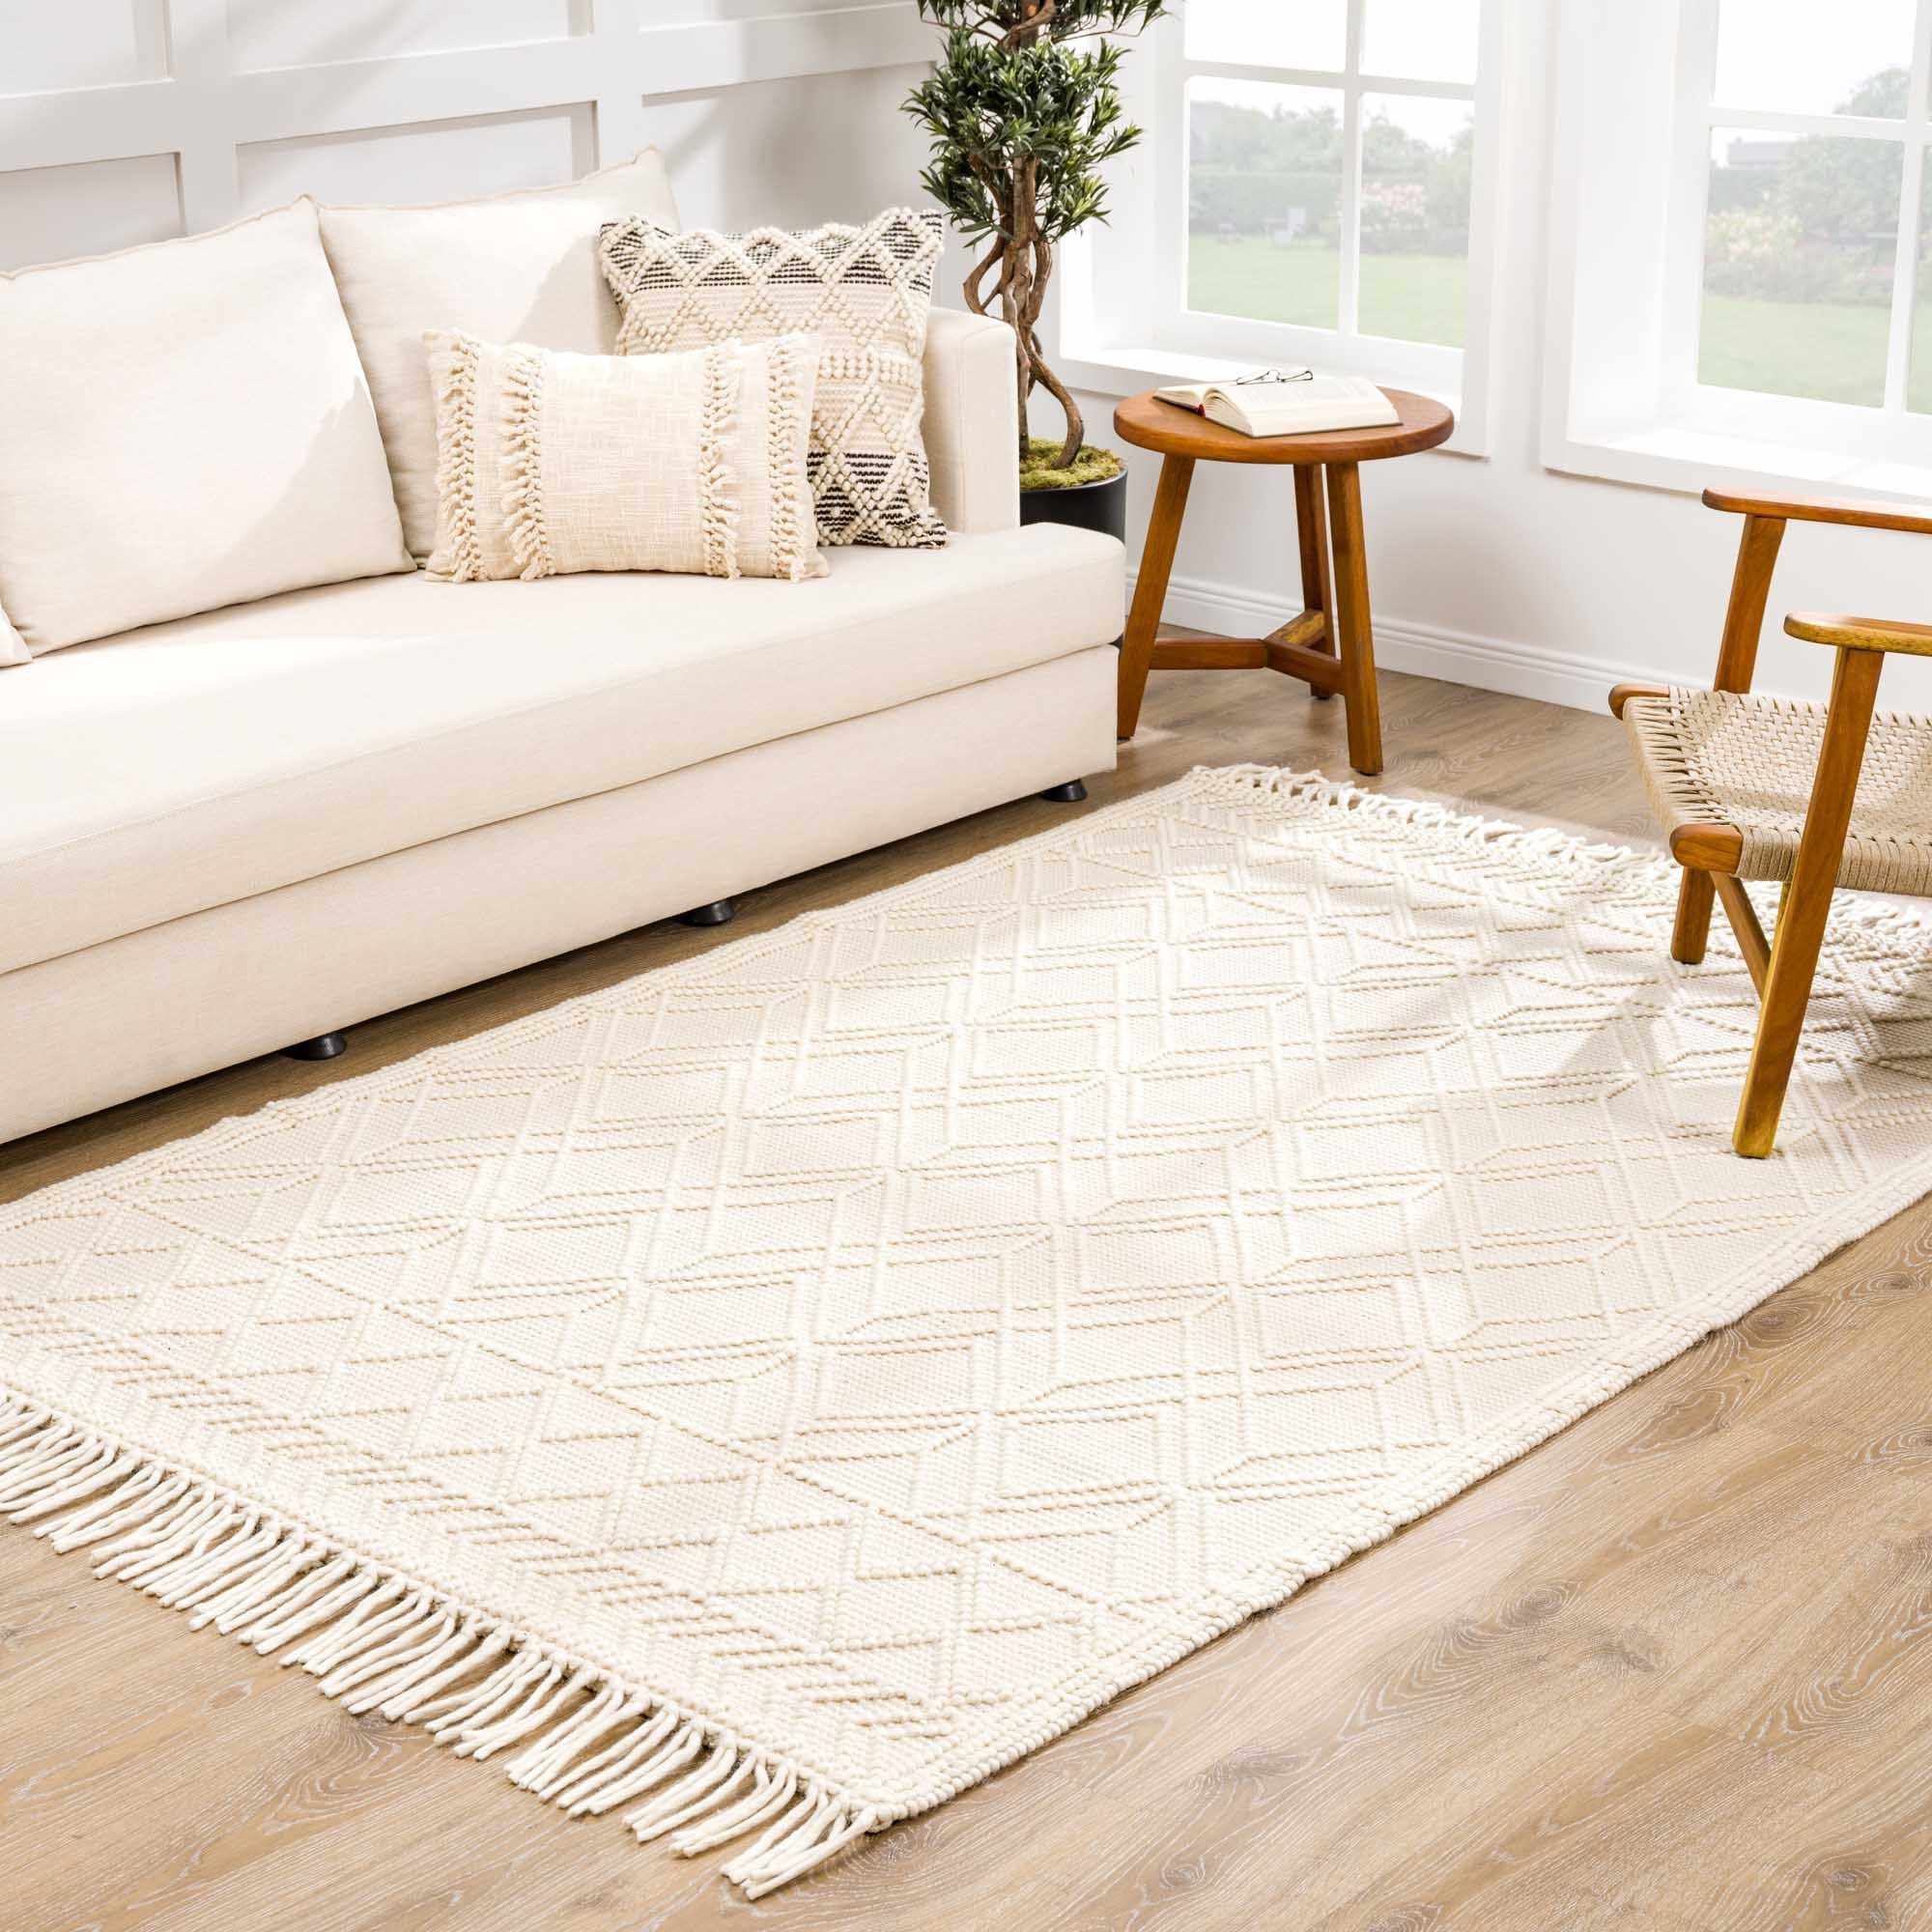 IOHOUZE Washable Area Rug 4x6, Non Slip Farmhouse Bedroom Rugs Entryway  Rugs, Low Pile Light Grey Cotton Woven Indoor Outdoor Modern Boho Carpet  for